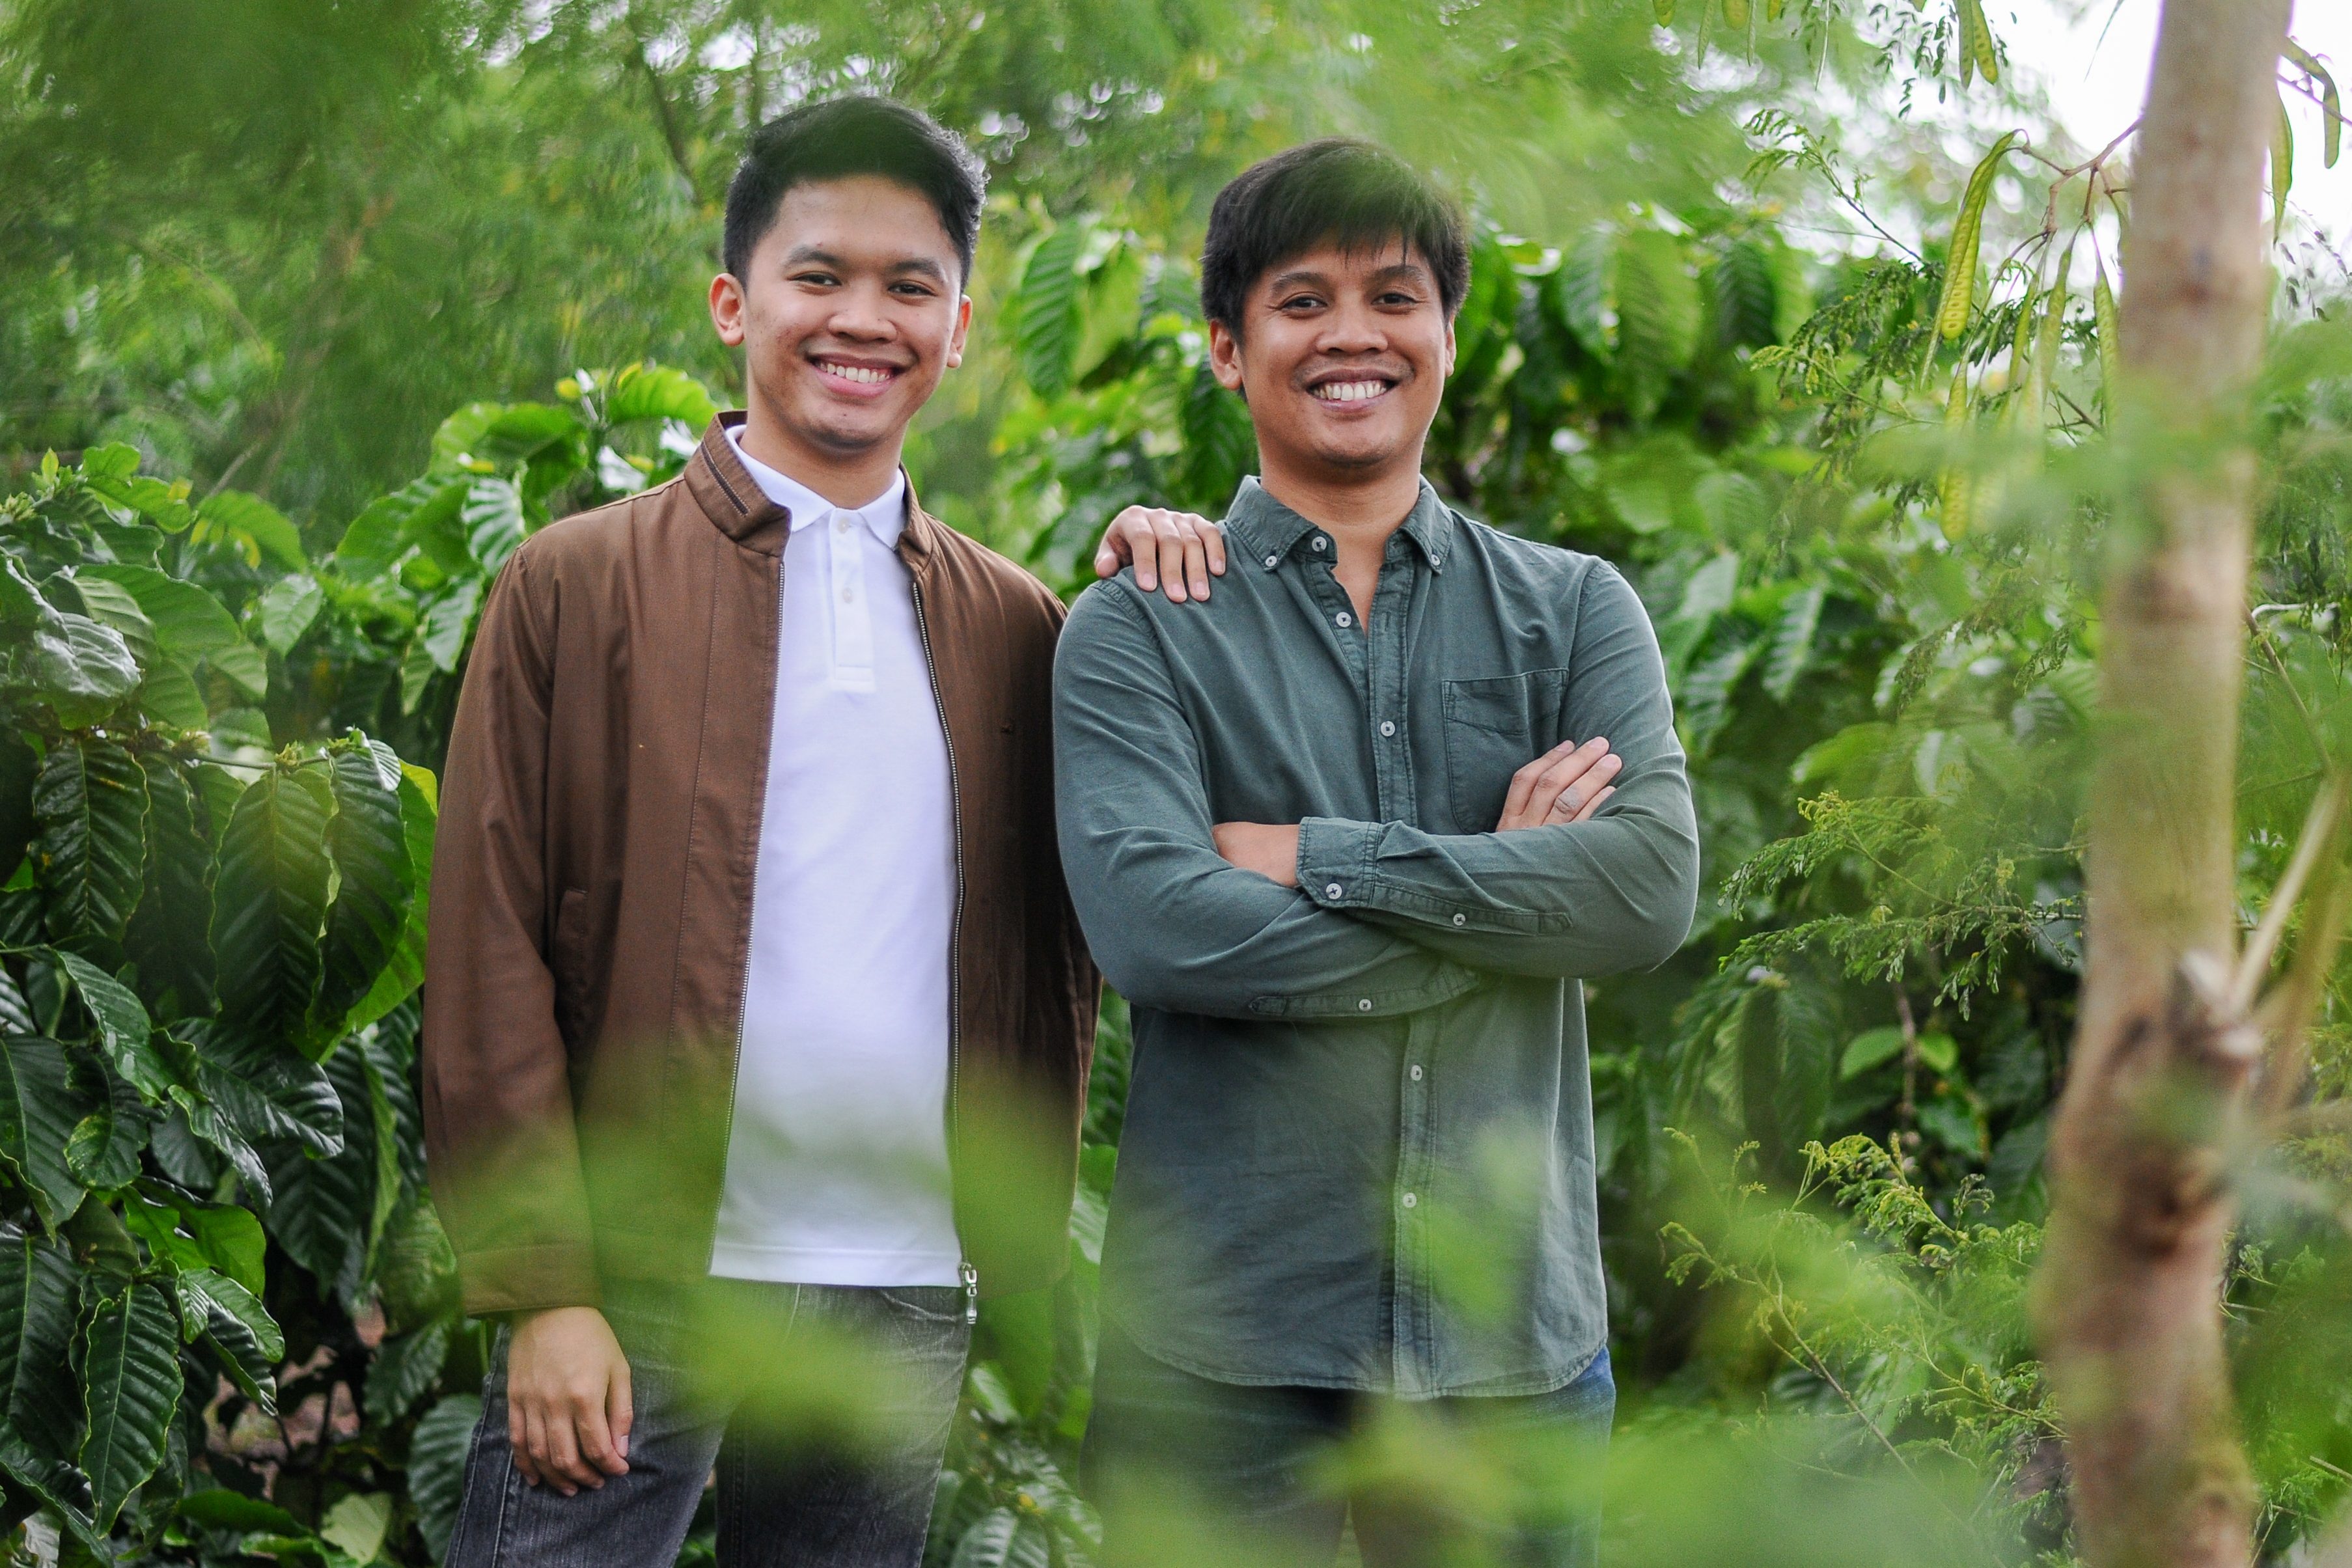 ALL IN THE FAMILY. Guiel Albiola (right) together with his younger brother Niño (left) comes from a family of coffee traders. Photos courtesy of Nescafé 